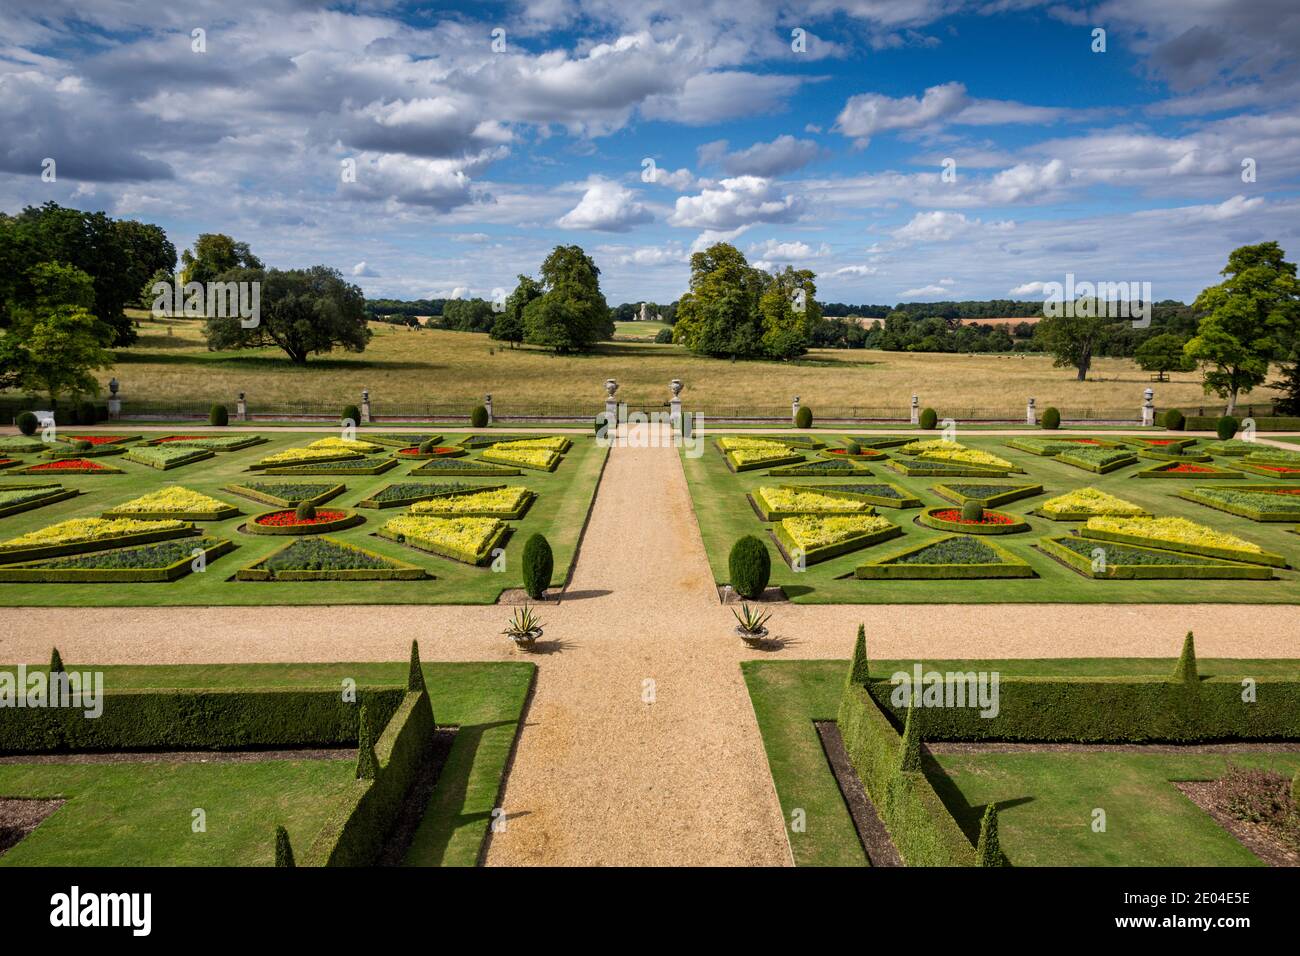 The rear gardens of Wimpole Hall, a country house located in the Wimpole Estate, Cambridgeshire, England. Stock Photo